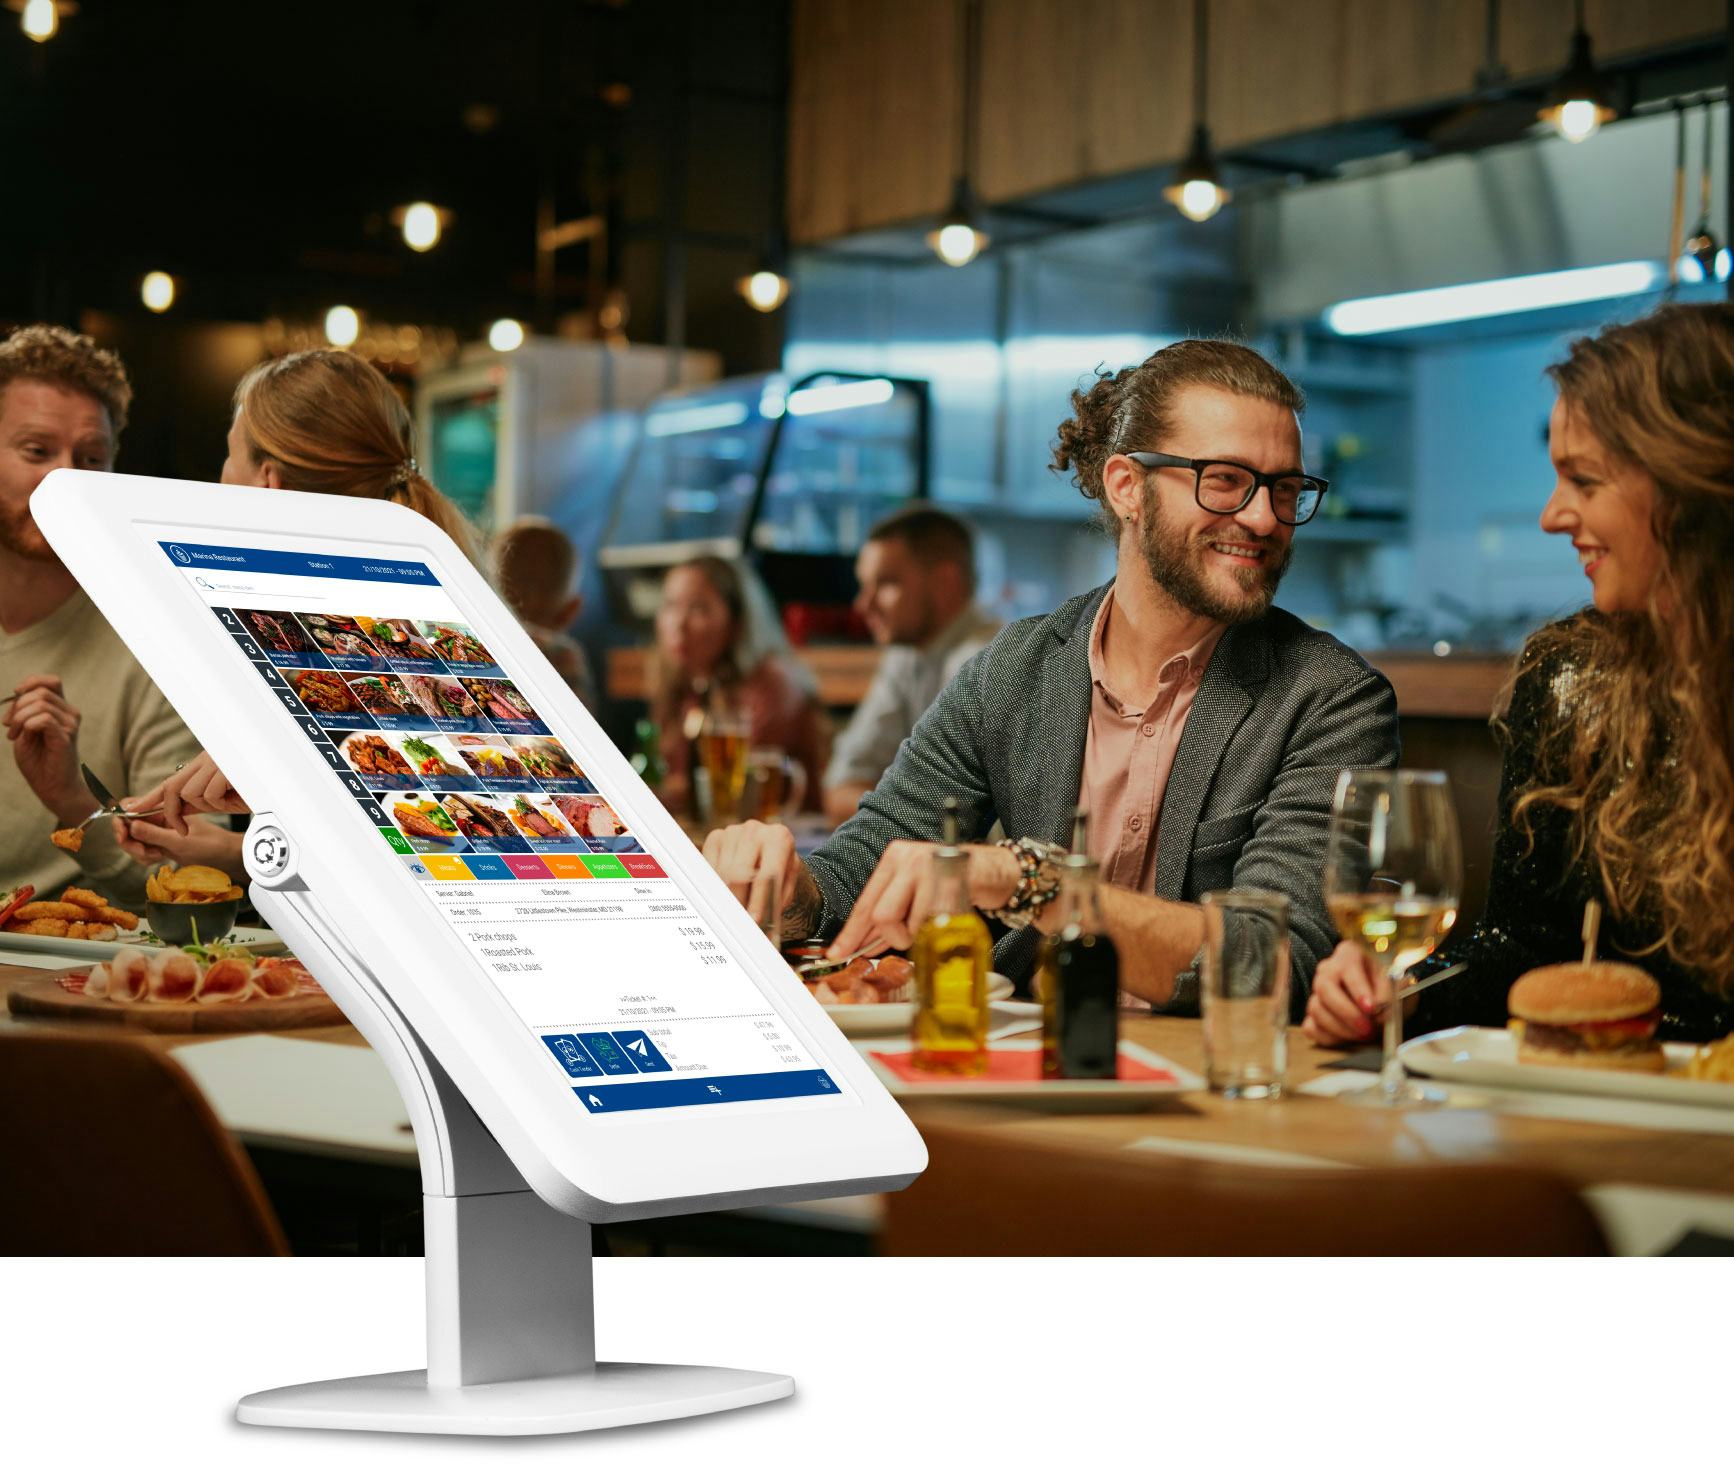 Dessert POS Software - EASIER, SMARTER AND BUILT For Restaurant Industry The perfect Restaurant POS, DESSERT POS is field proven and feature rich. Designed to simplify operations for restaurant owners.